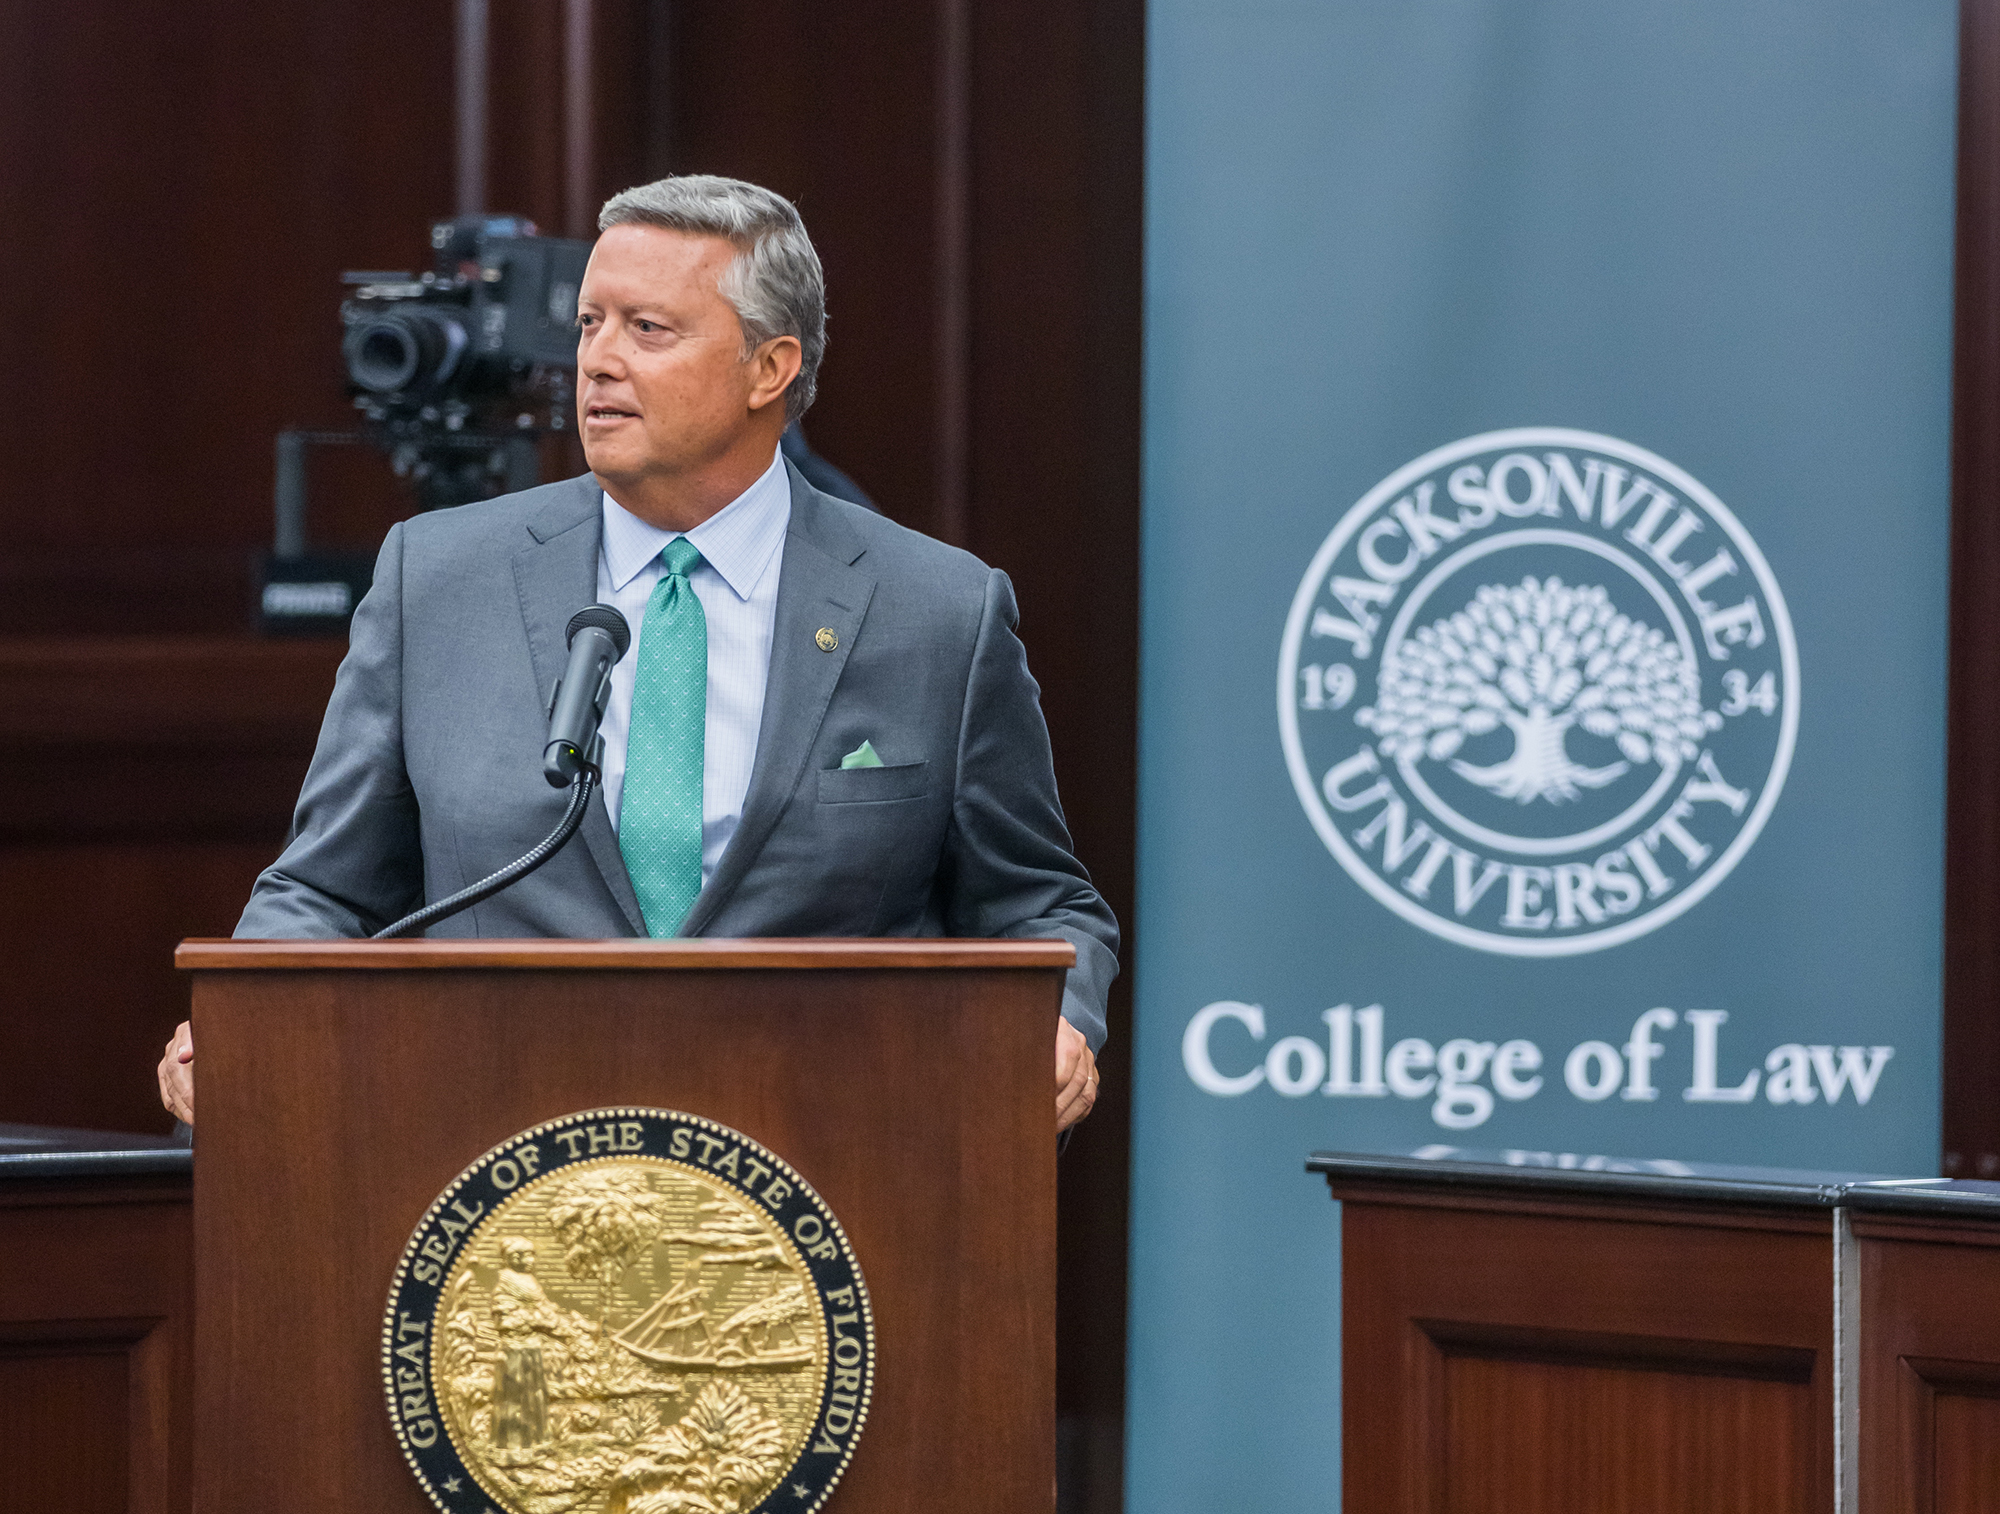 Jacksonville University President Tim Cost speaks at the law school’s convocation Aug. 5 at the Duval County Courthouse.